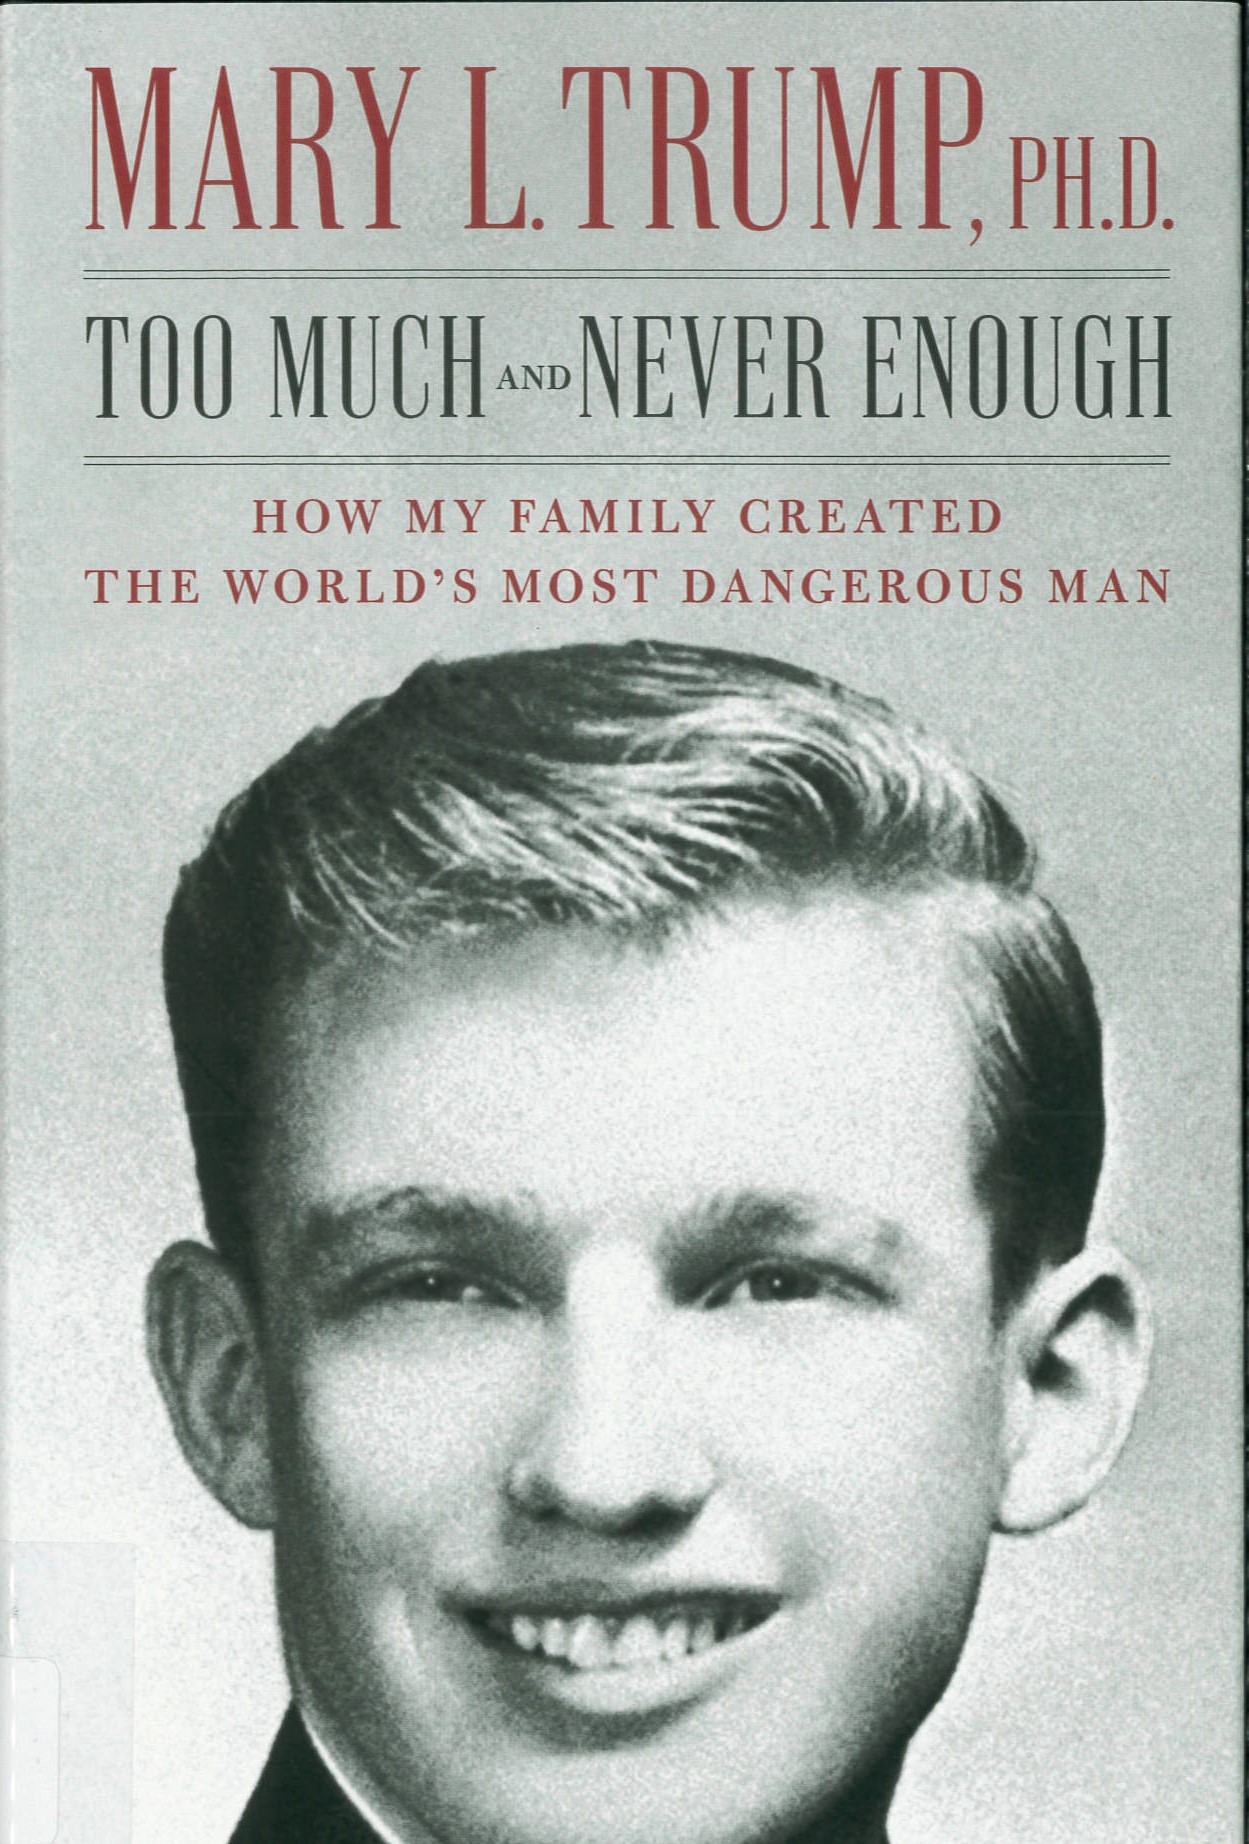 Too much and never enough : how my family created the world